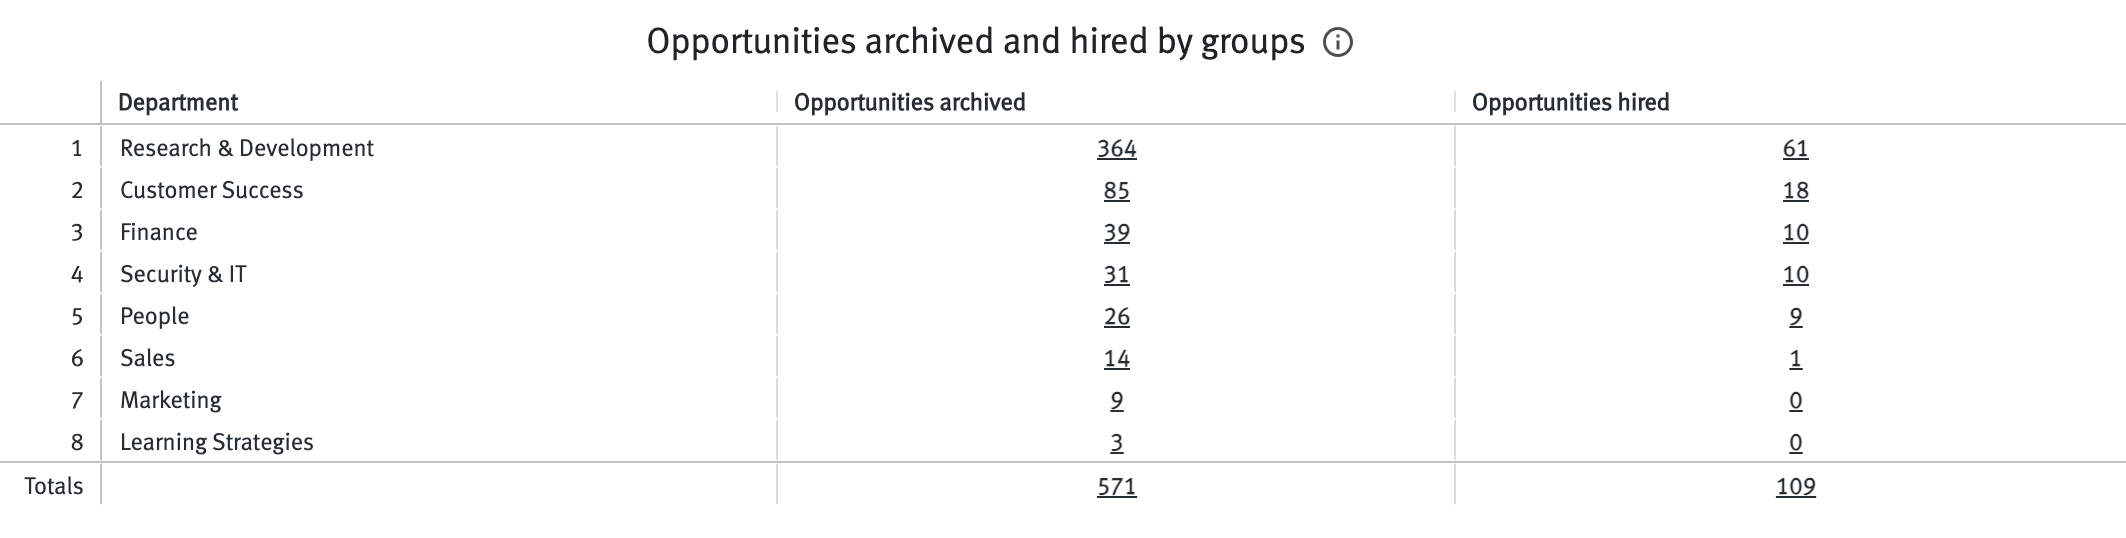 Opportunities archived and hired by groups chart